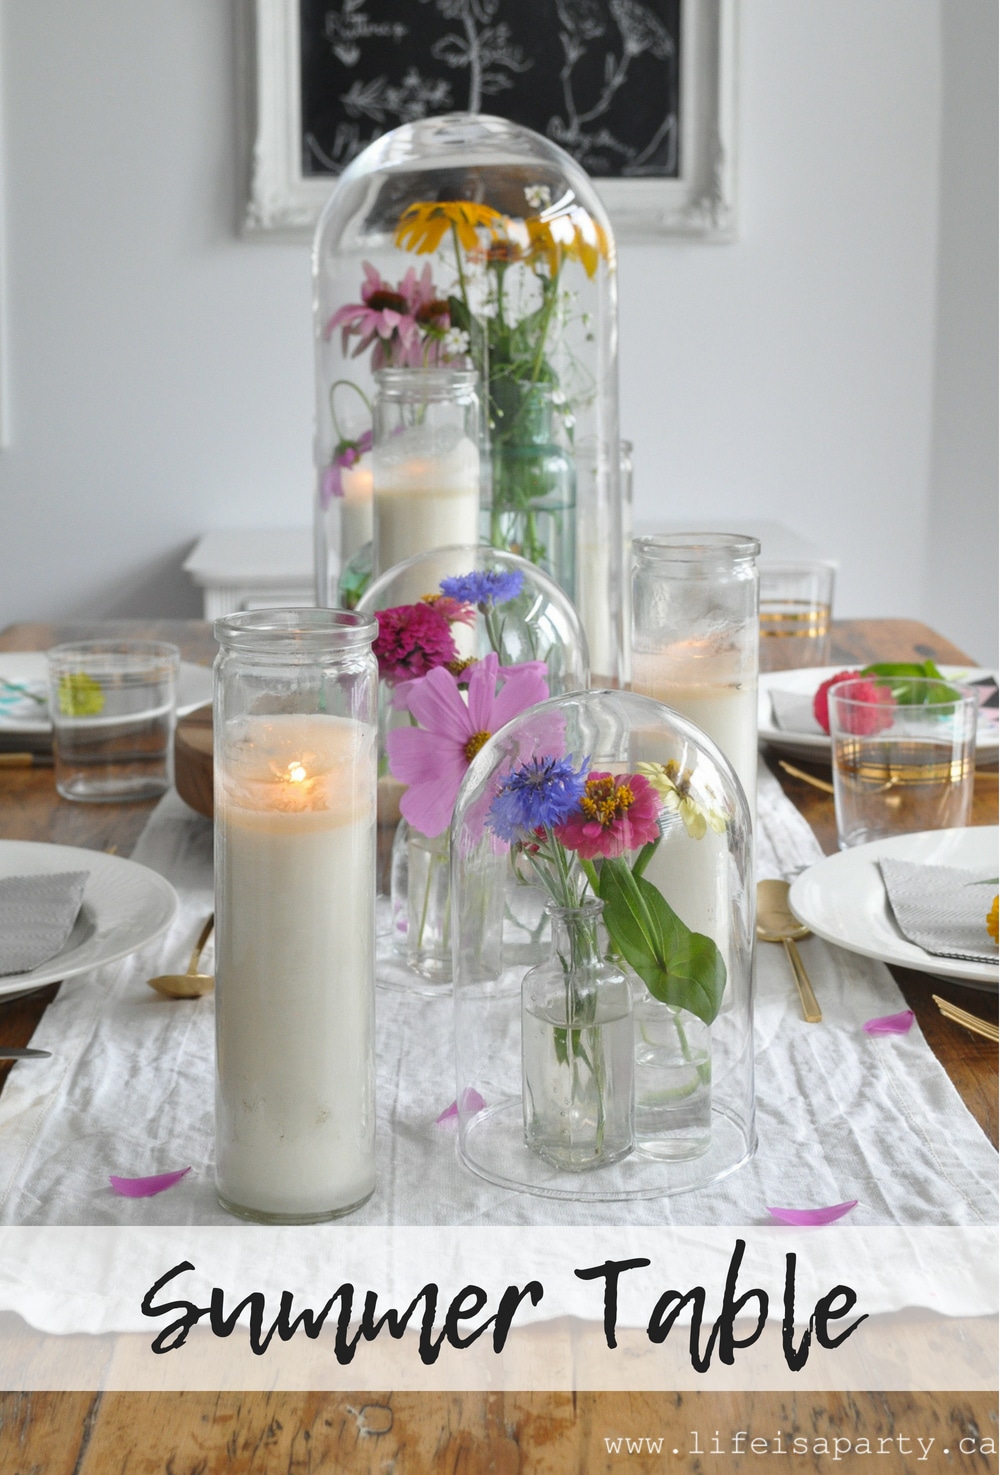 Summer Tablescape -garden flowers in vintage bottles under glass cloches create a simple, easy summer time table for entertaining.